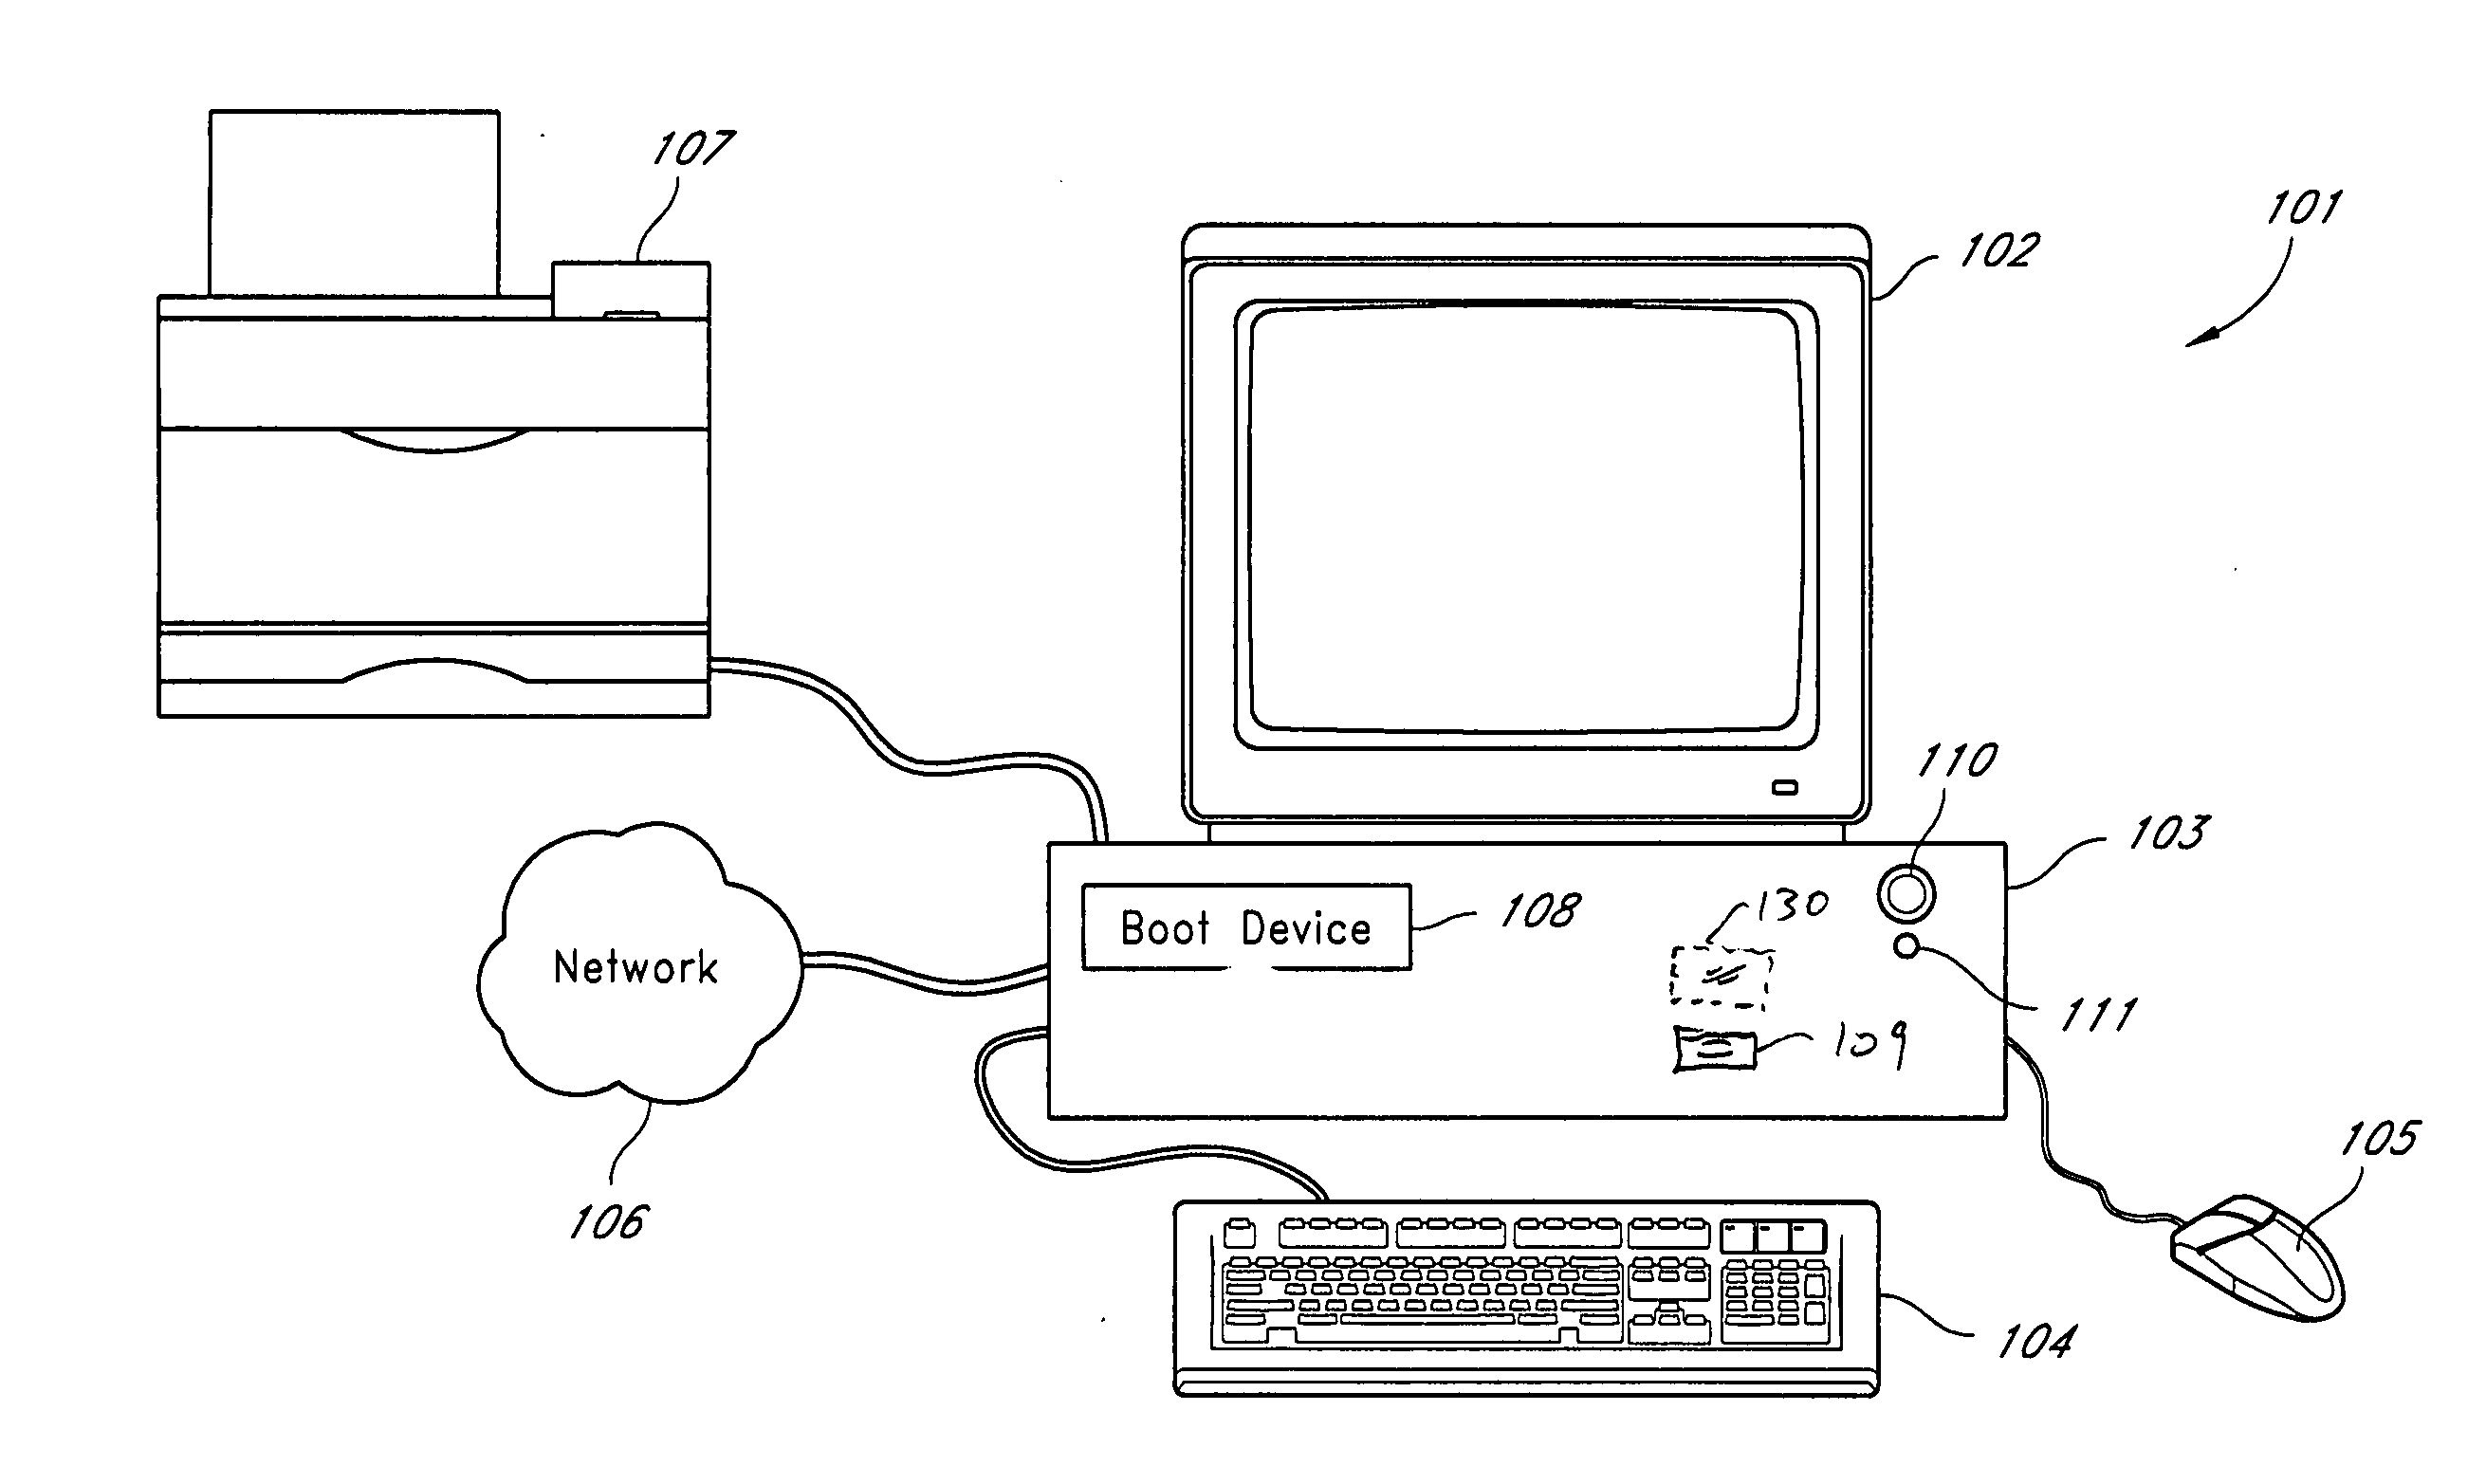 Virus-resistant computer with data interface for filtering data